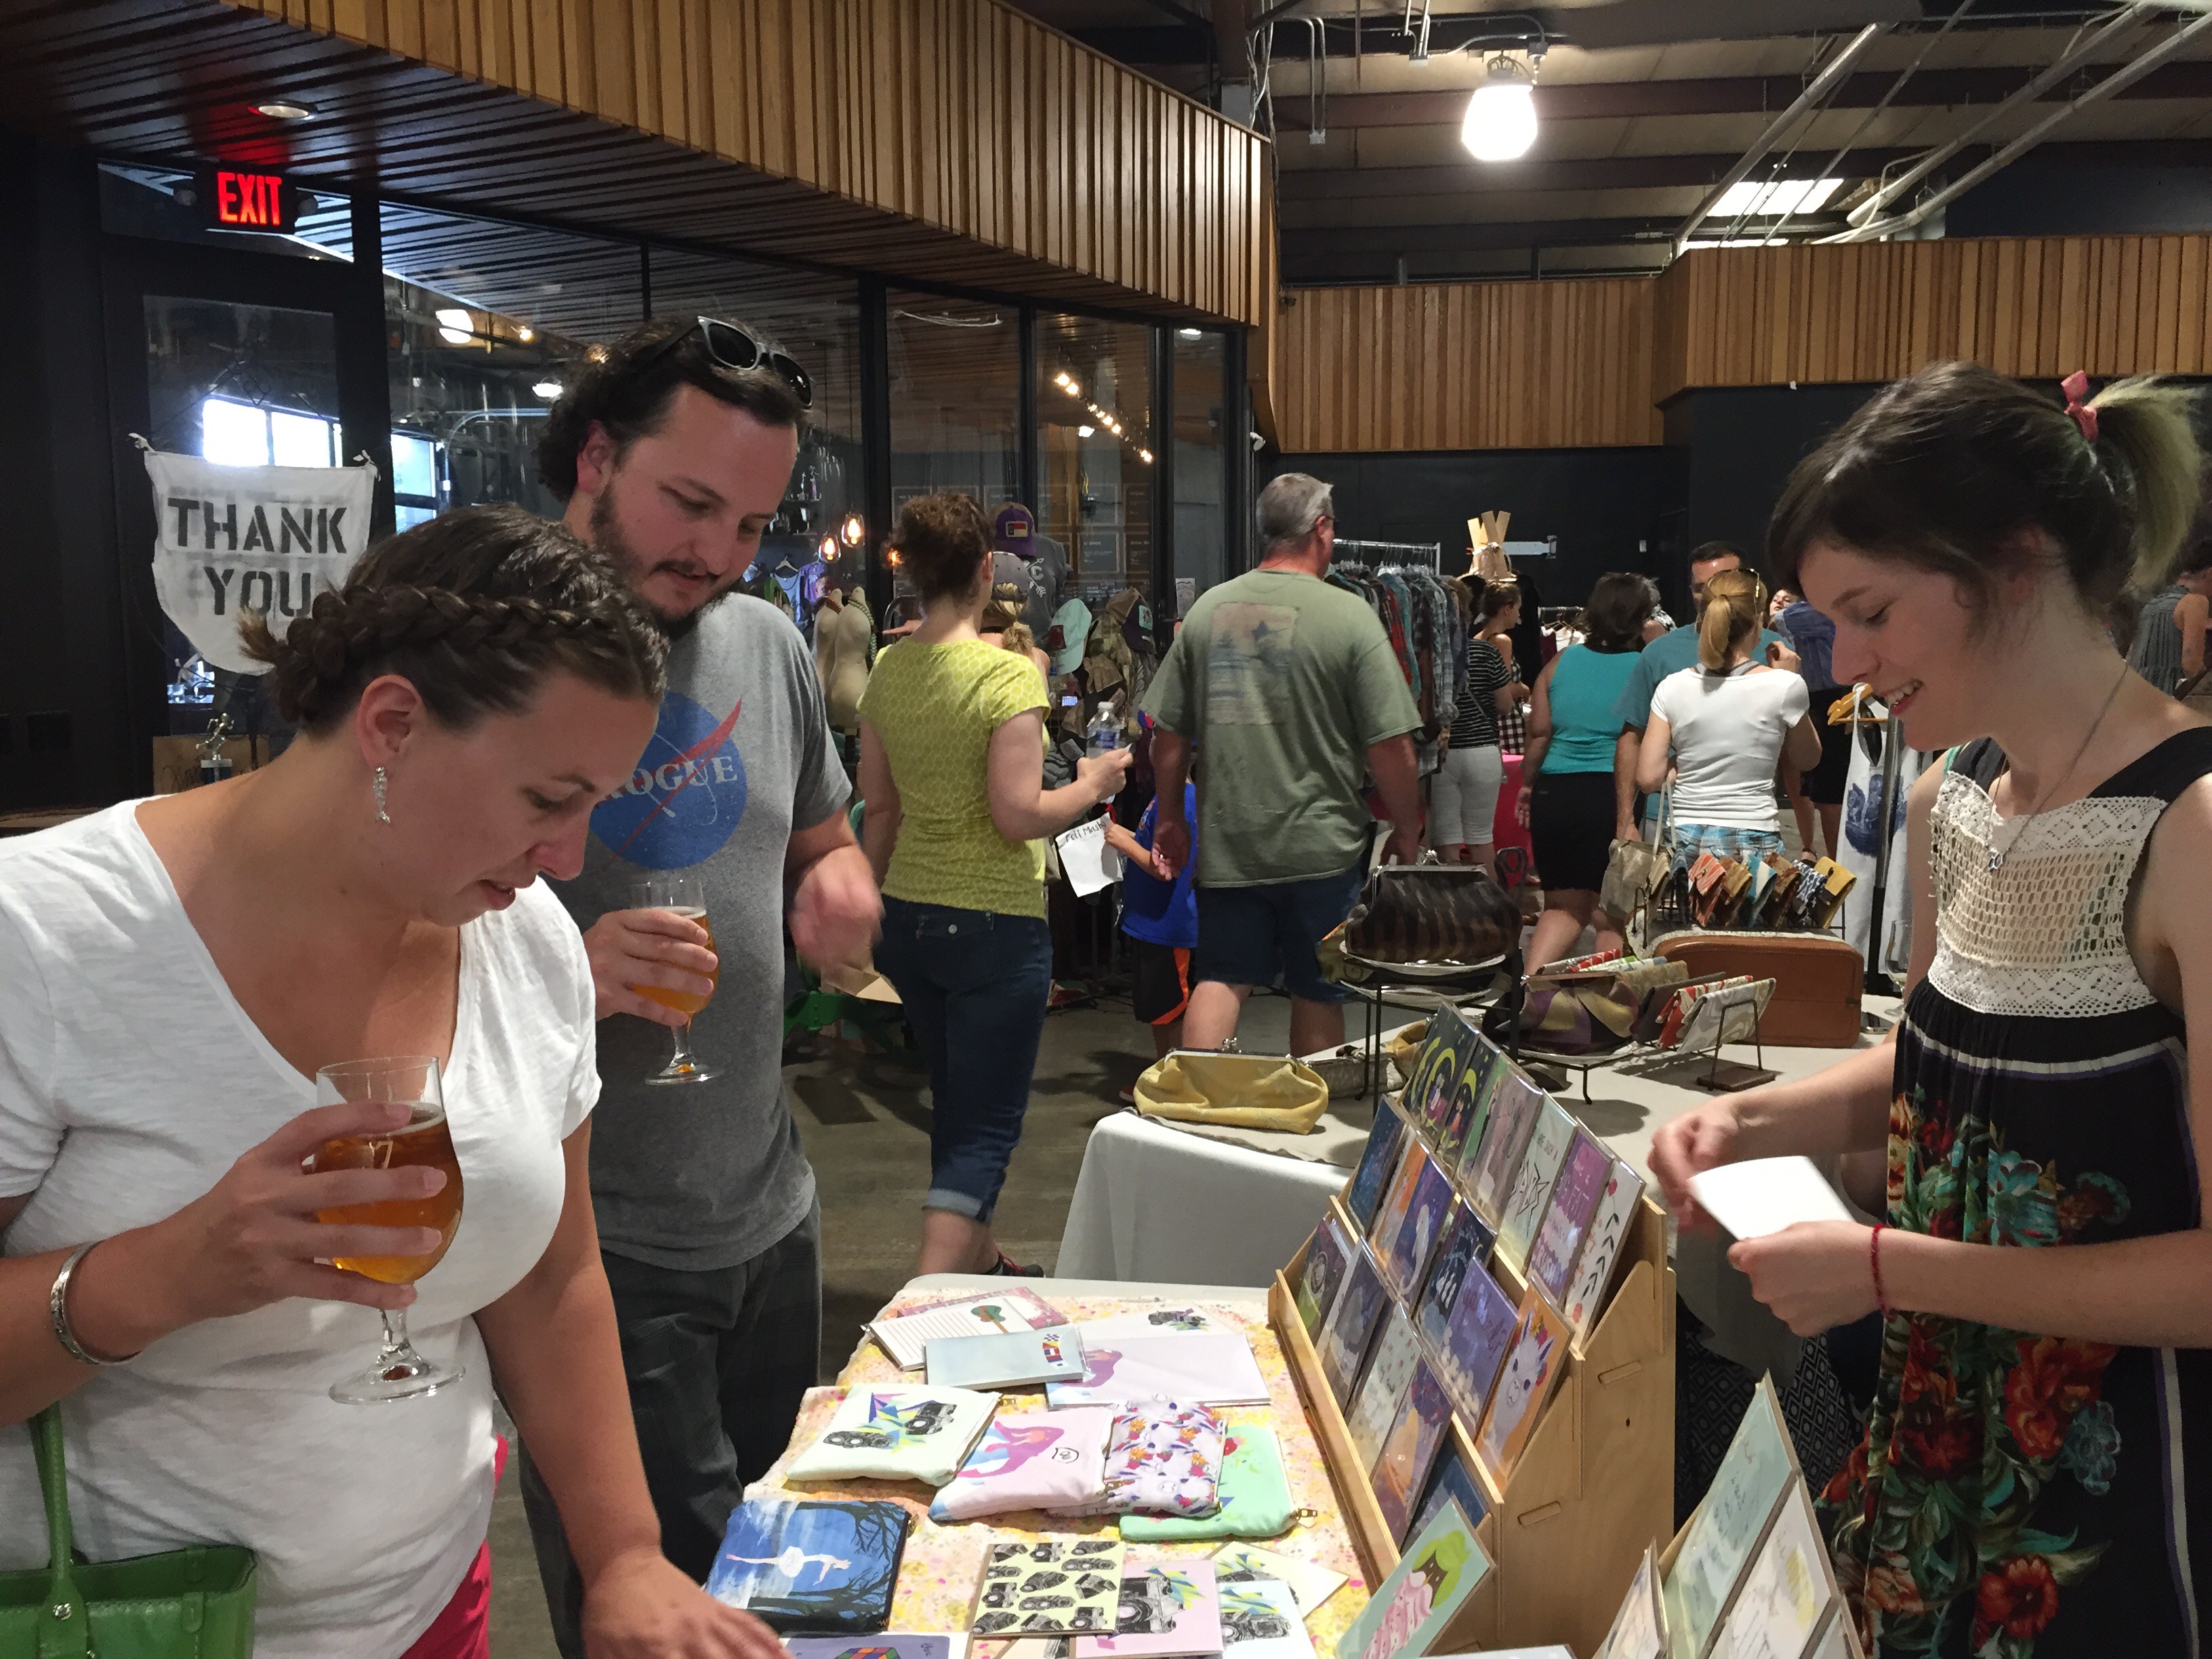 Our August Show is THIS Saturday – here’s our vendor list